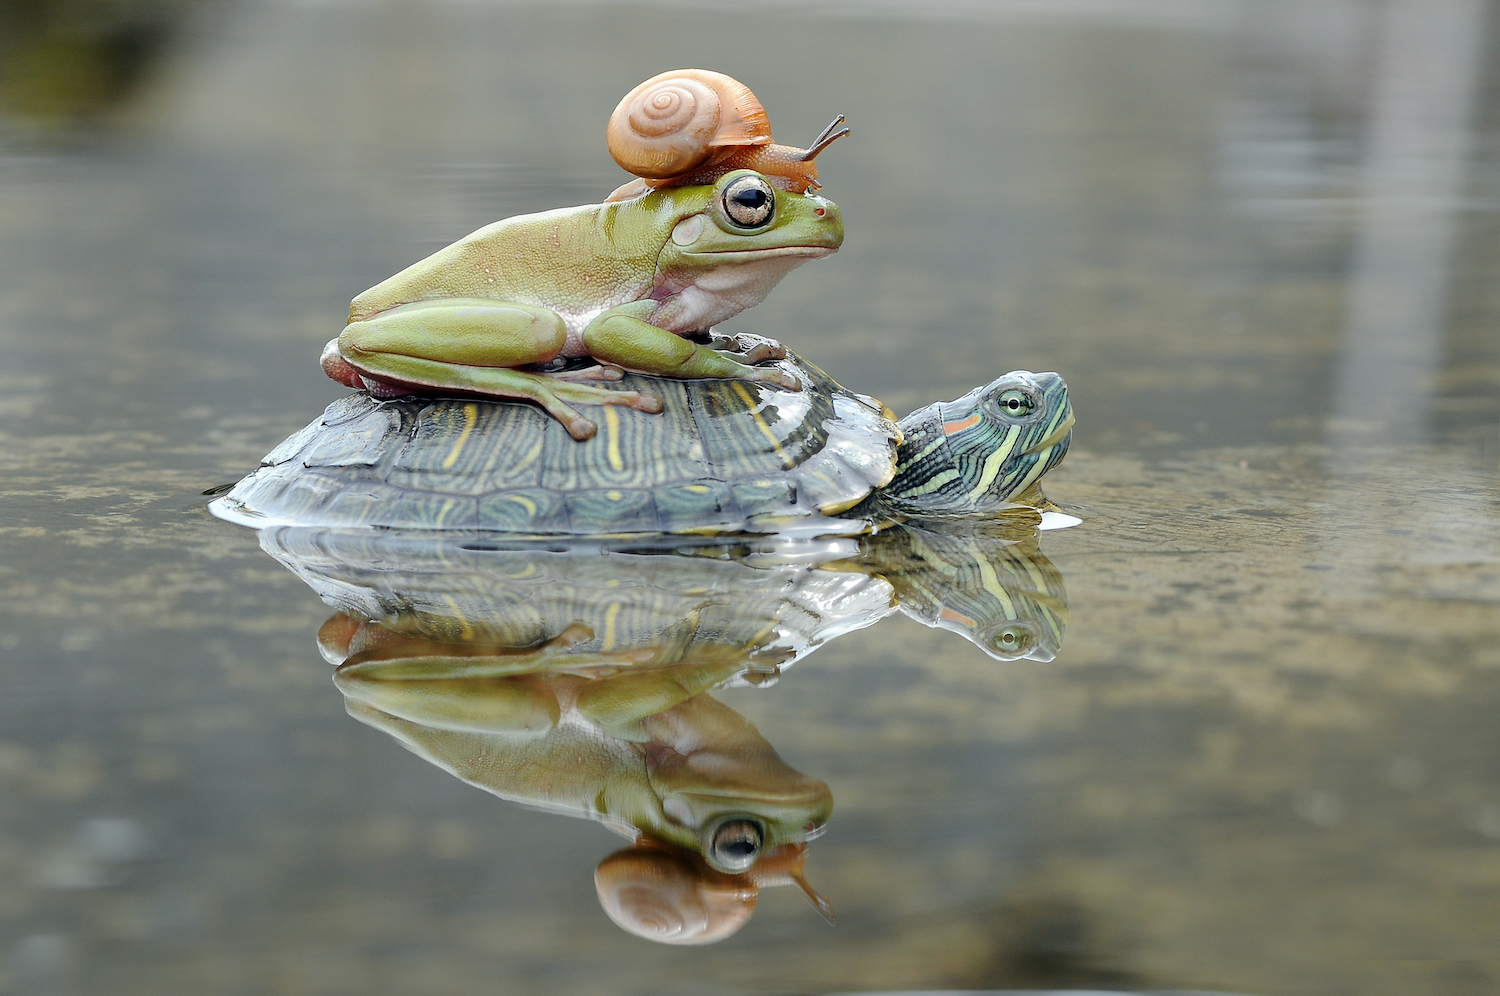 Frog and snail on the back of a turtle, Indonesia